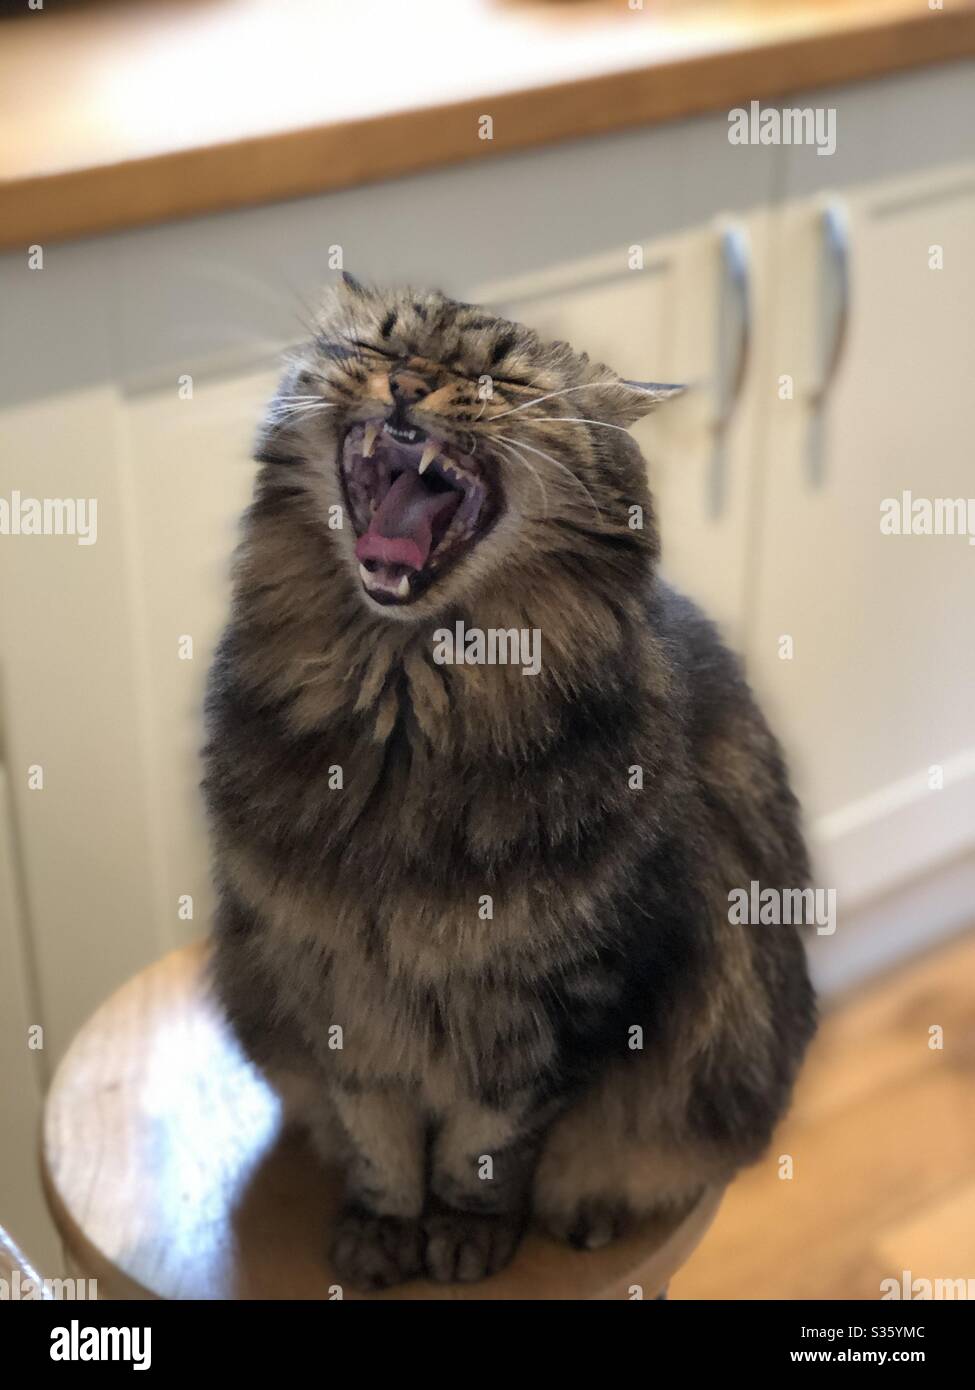 Big yawn from the cat Stock Photo